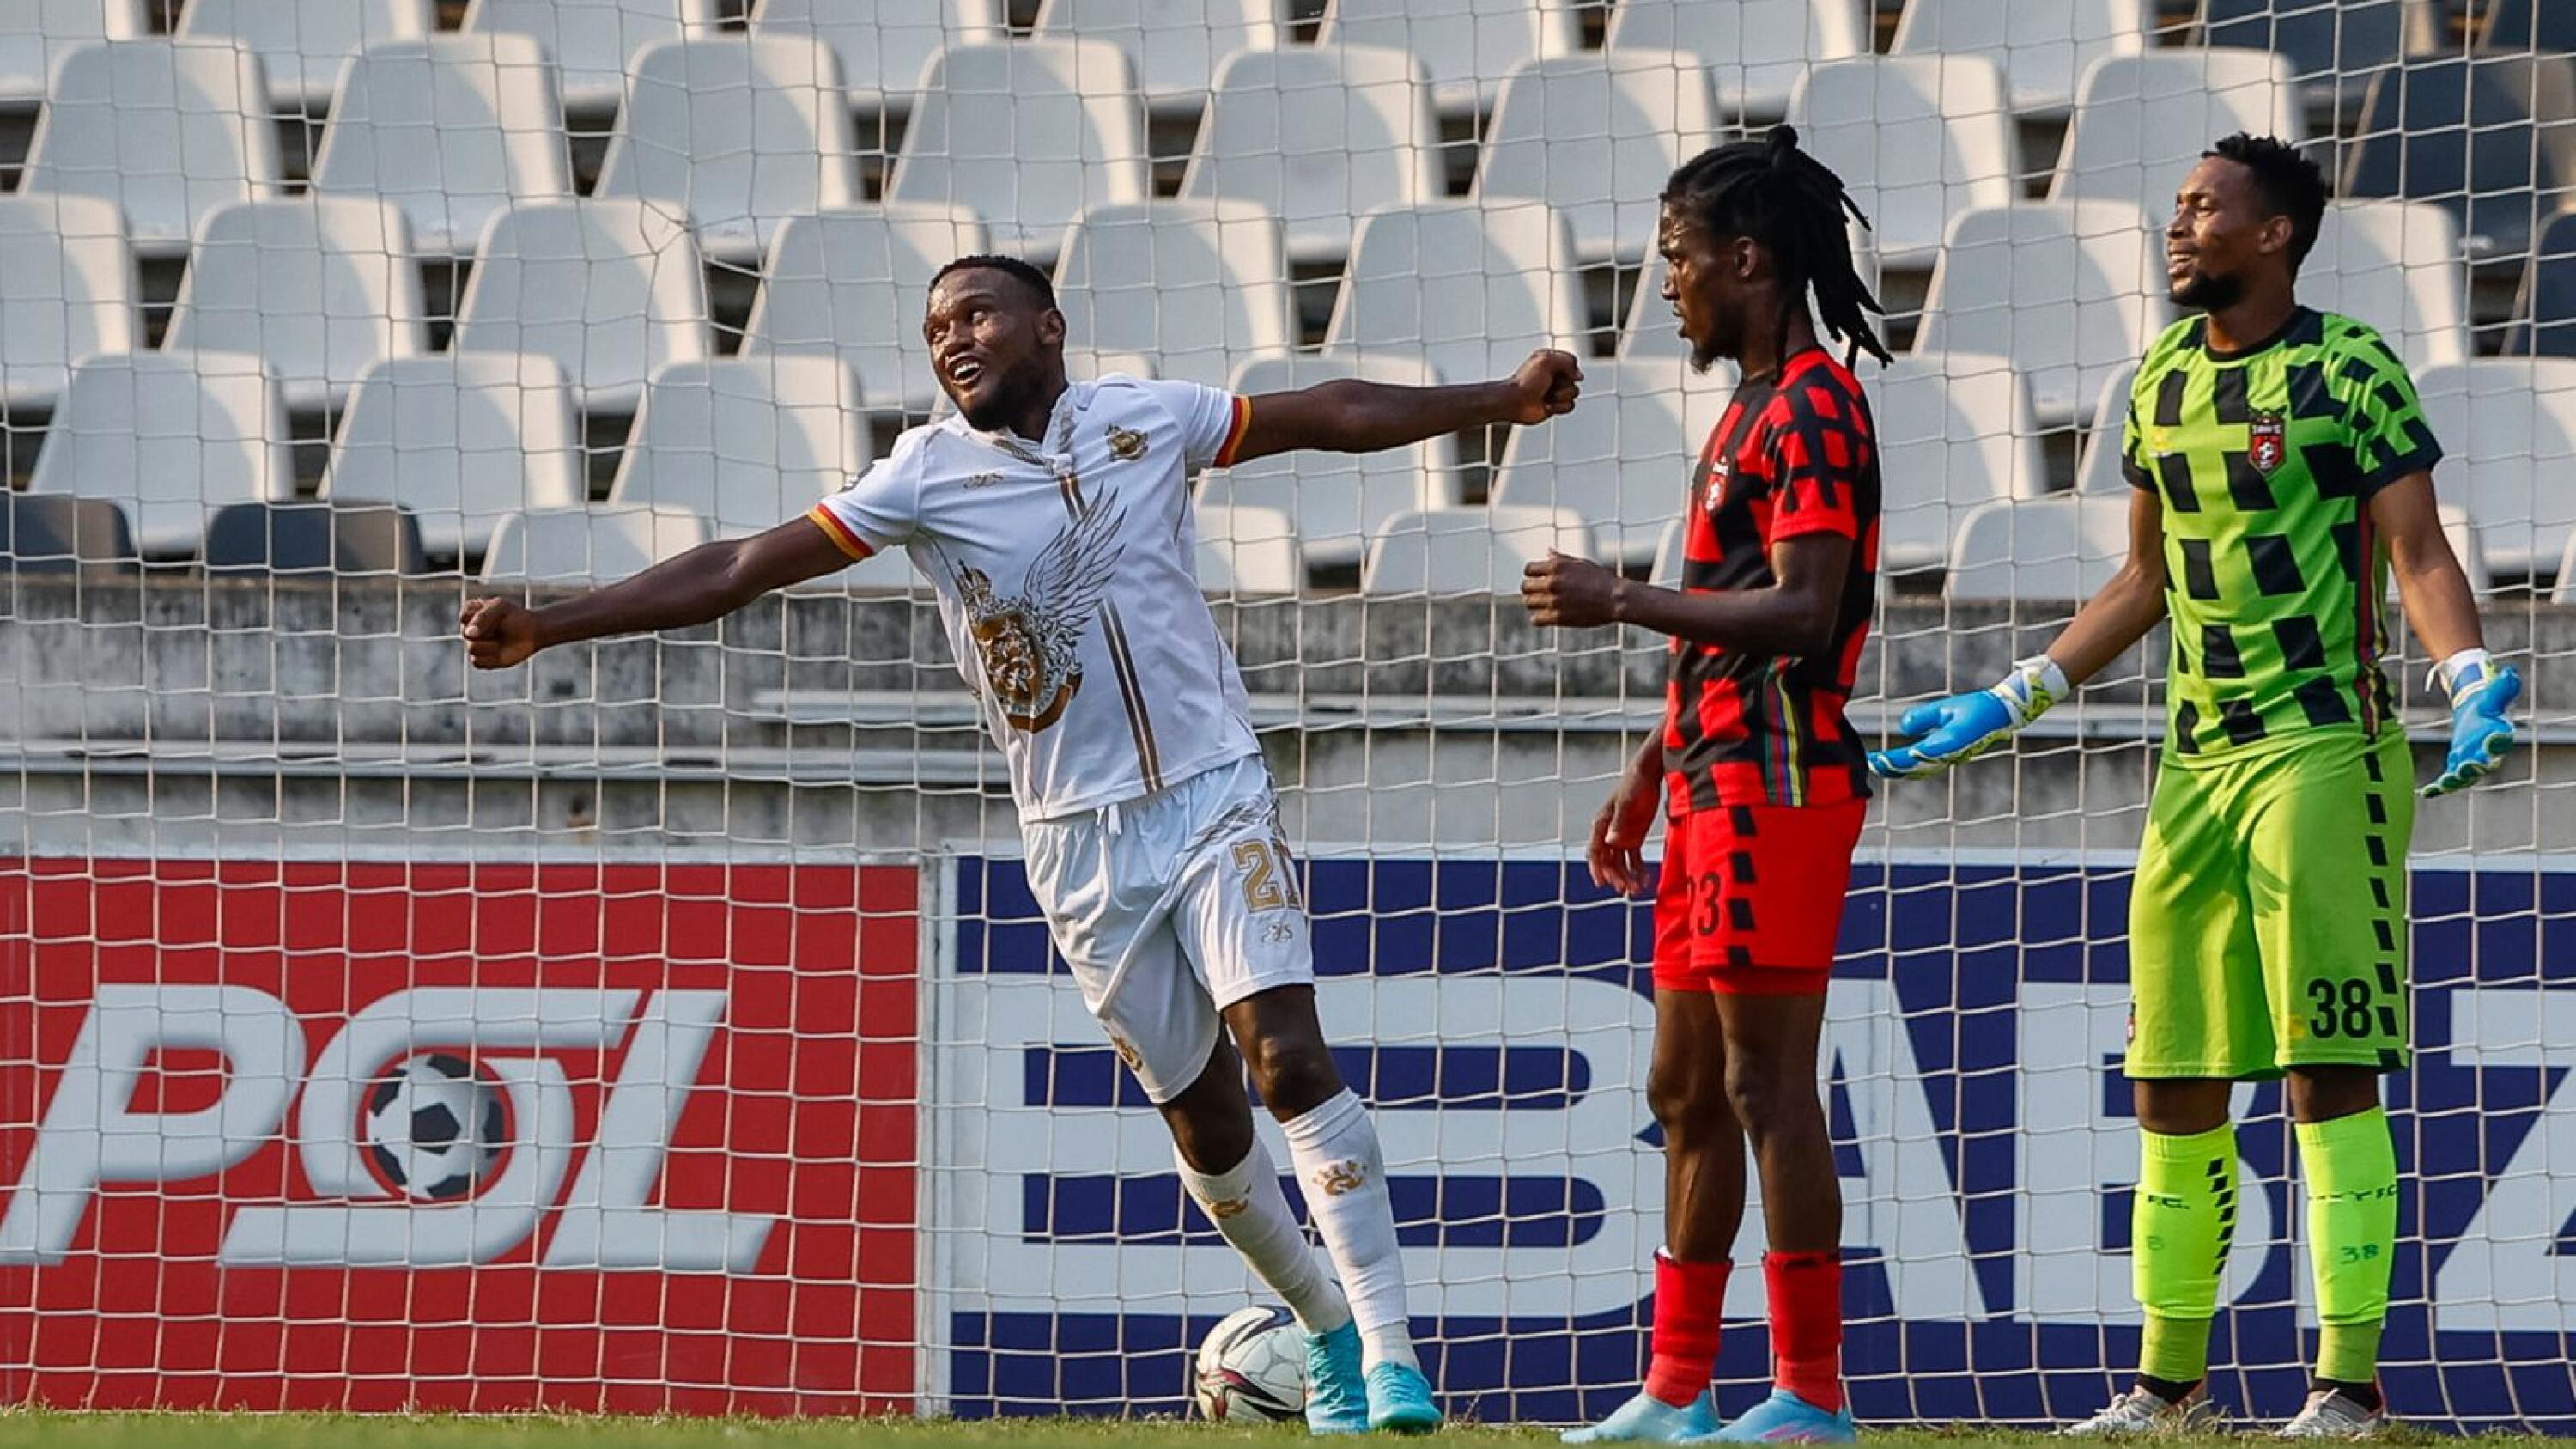 Victor Letsoalo of Royal AM after finding the back of the net during their DStv Premiership match against TS Galaxy at Mbombela Stadium in Mbombela on Saturday